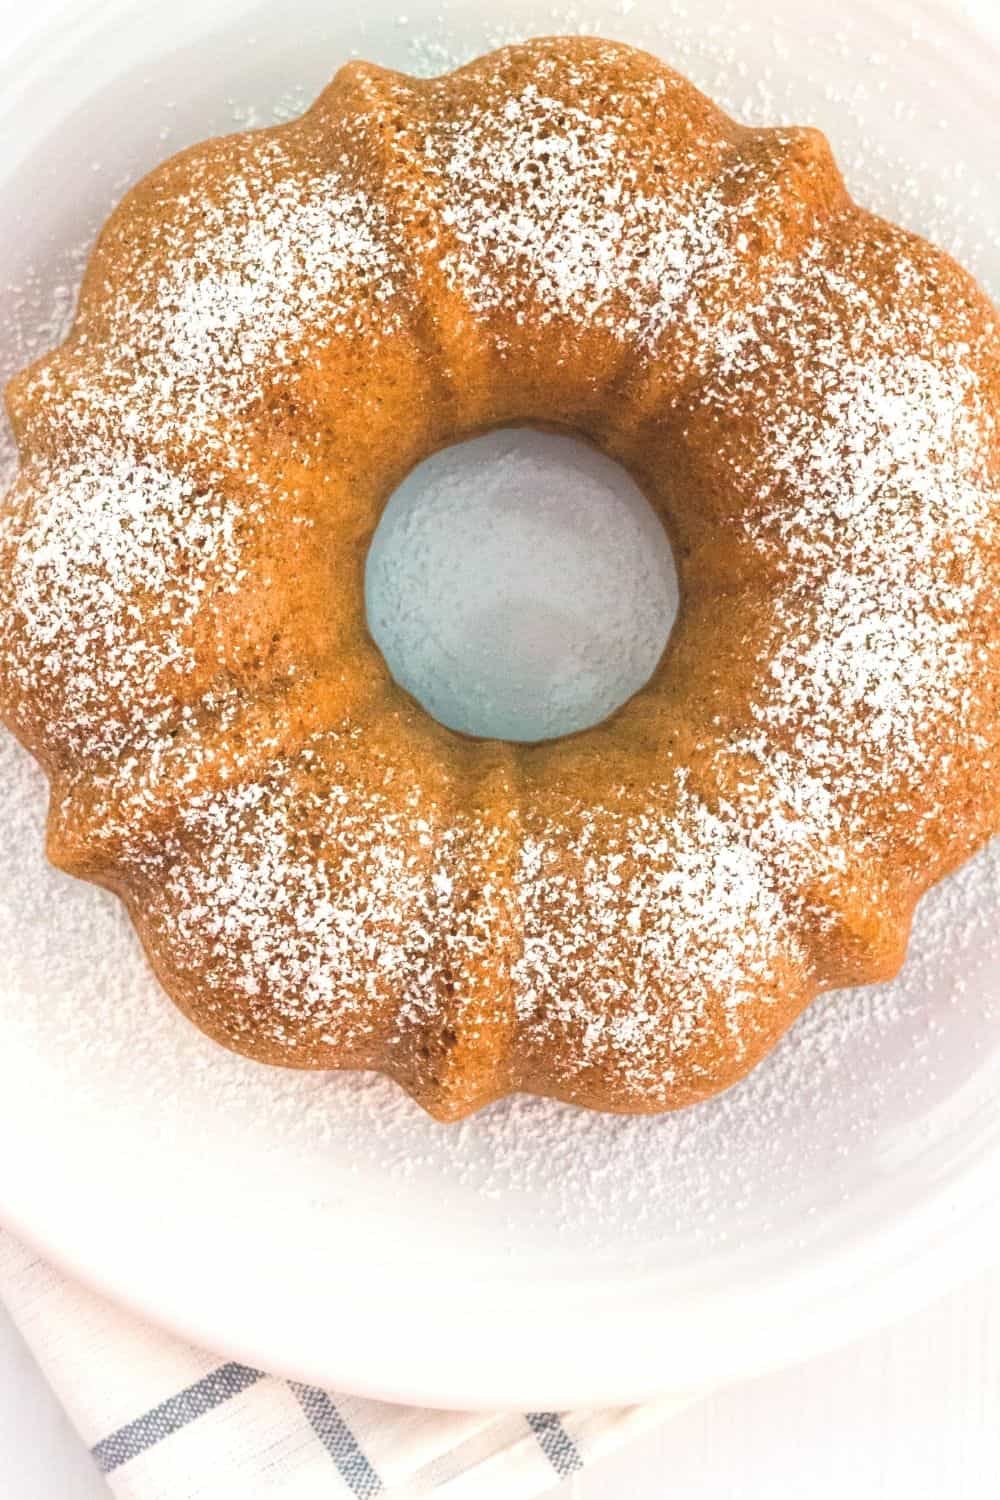 applesauce bundt cake cooked in the Instant Pot pressure cooker, served on a white plate and sprinkled with powdered sugar